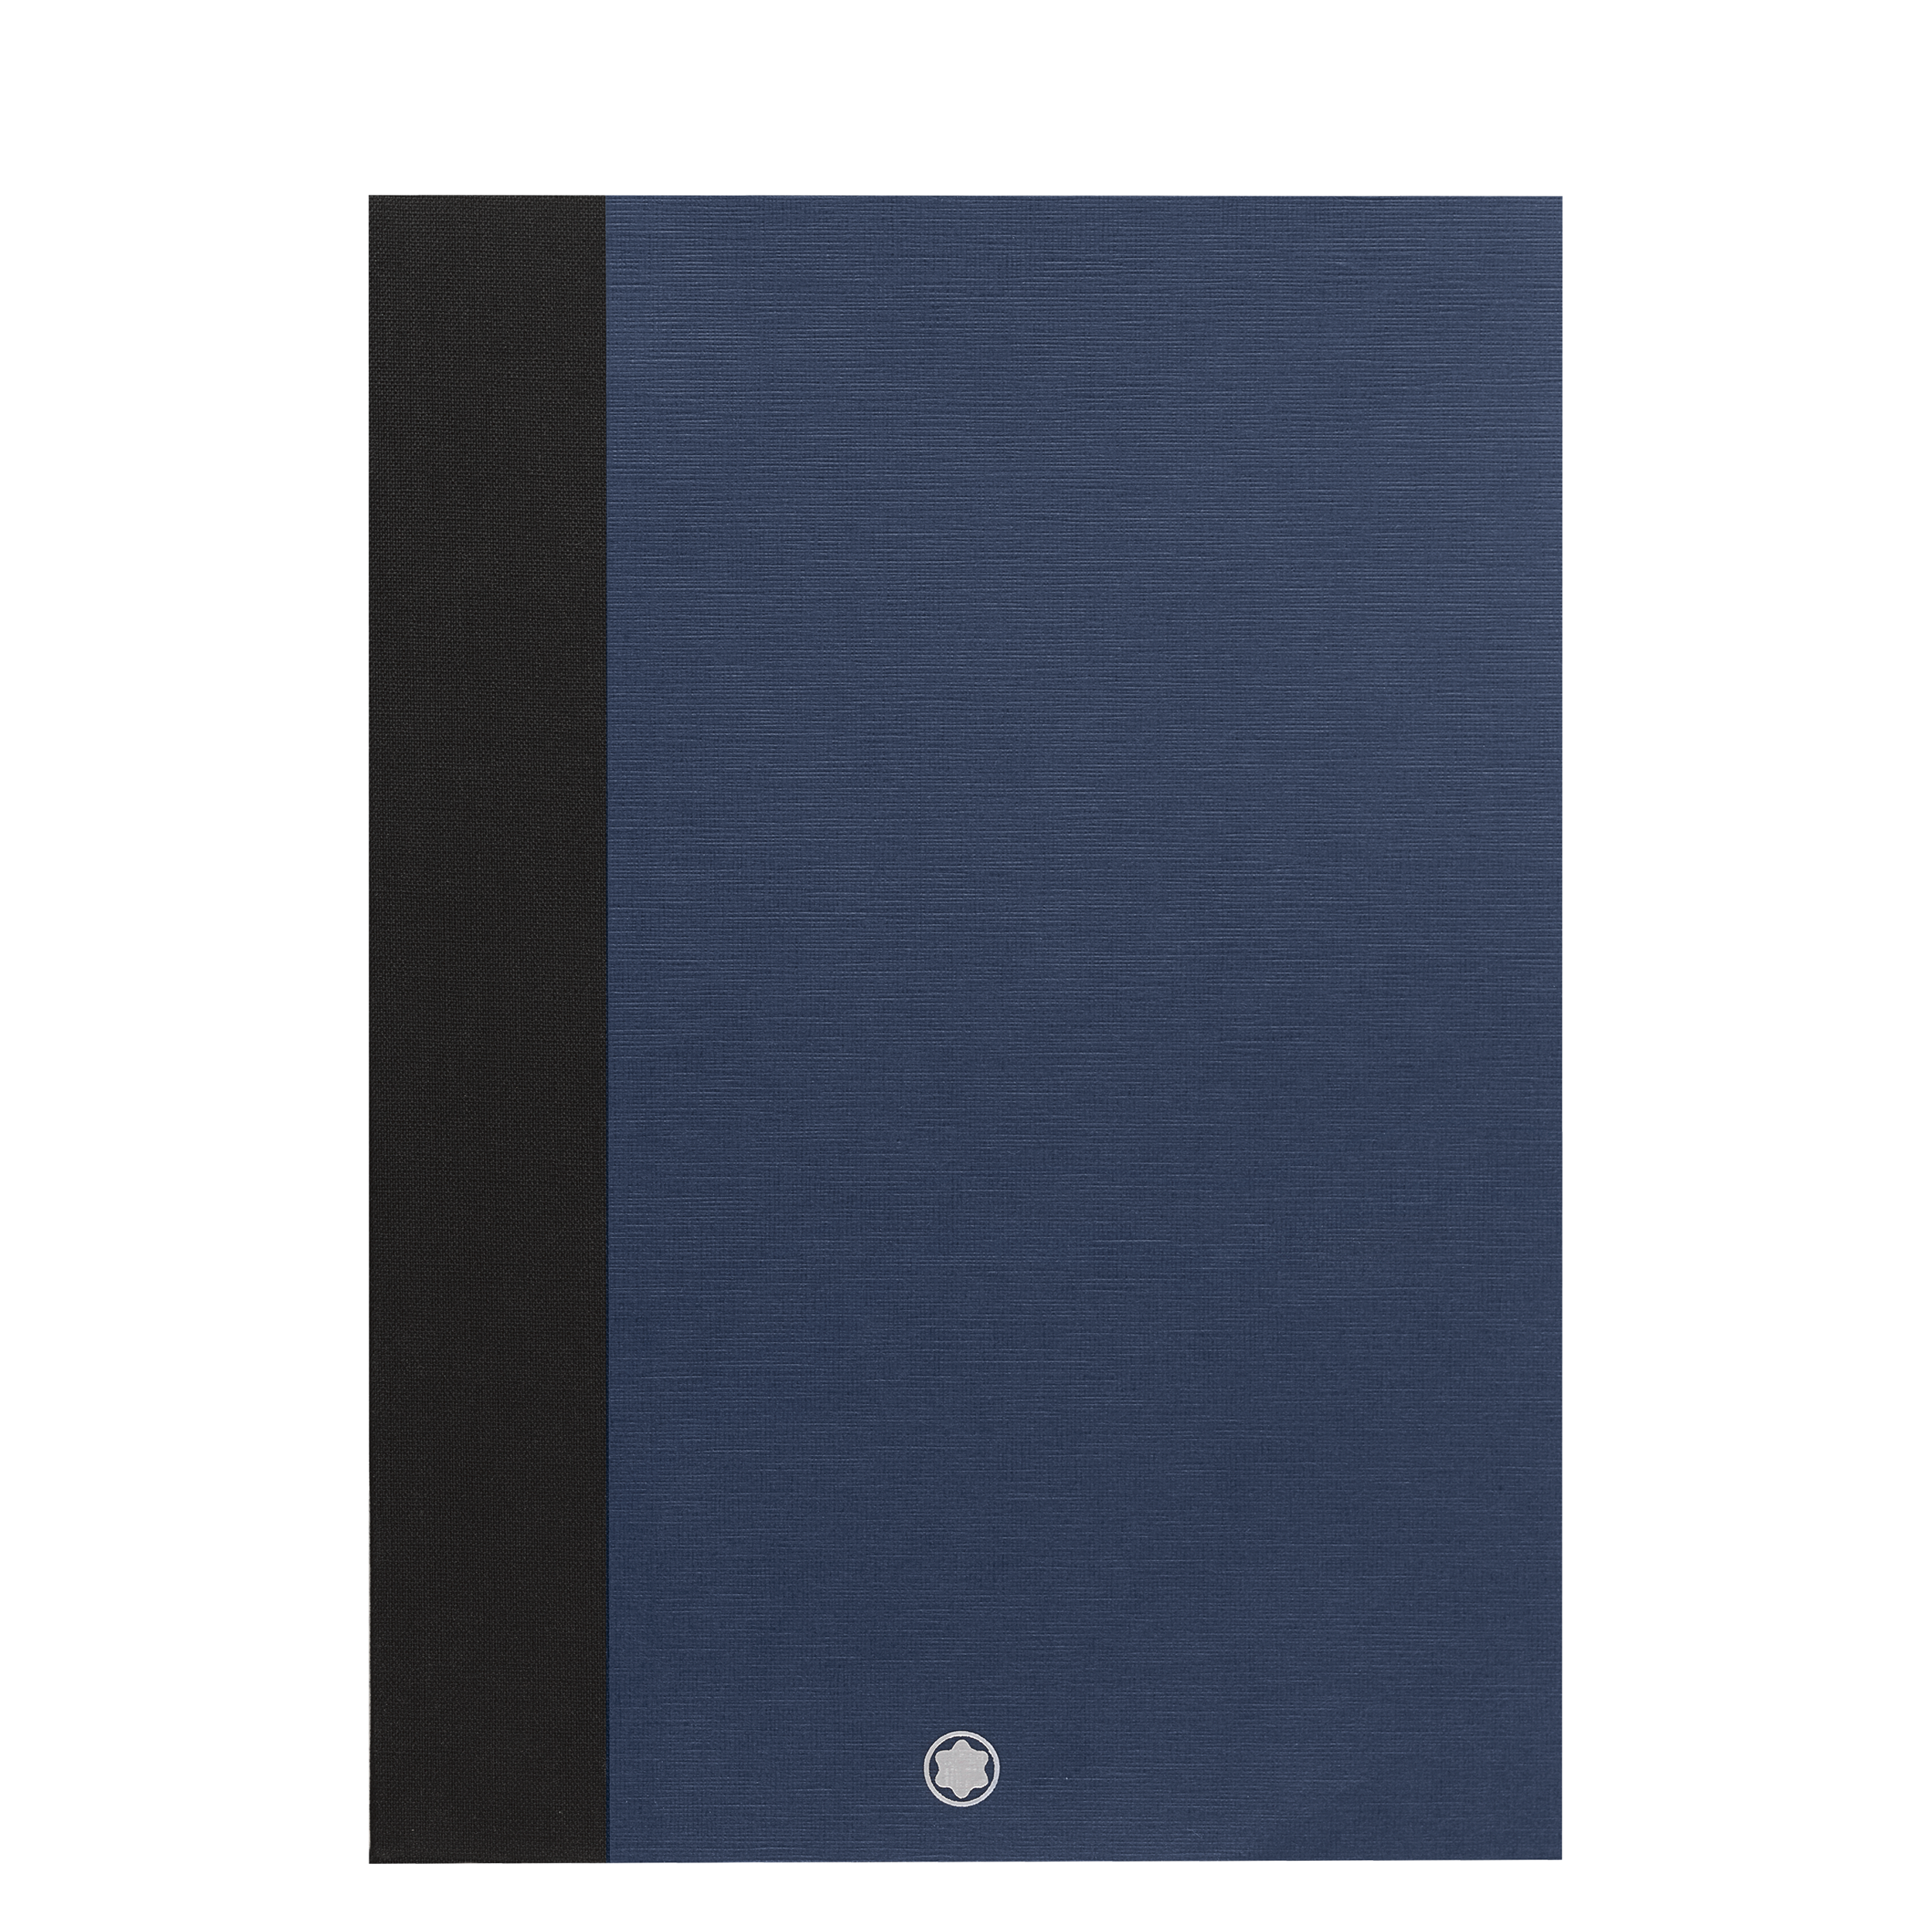 Montblanc Fine Stationery 2 Notebooks #146 Slim, Blue, blank for Augmented Paper